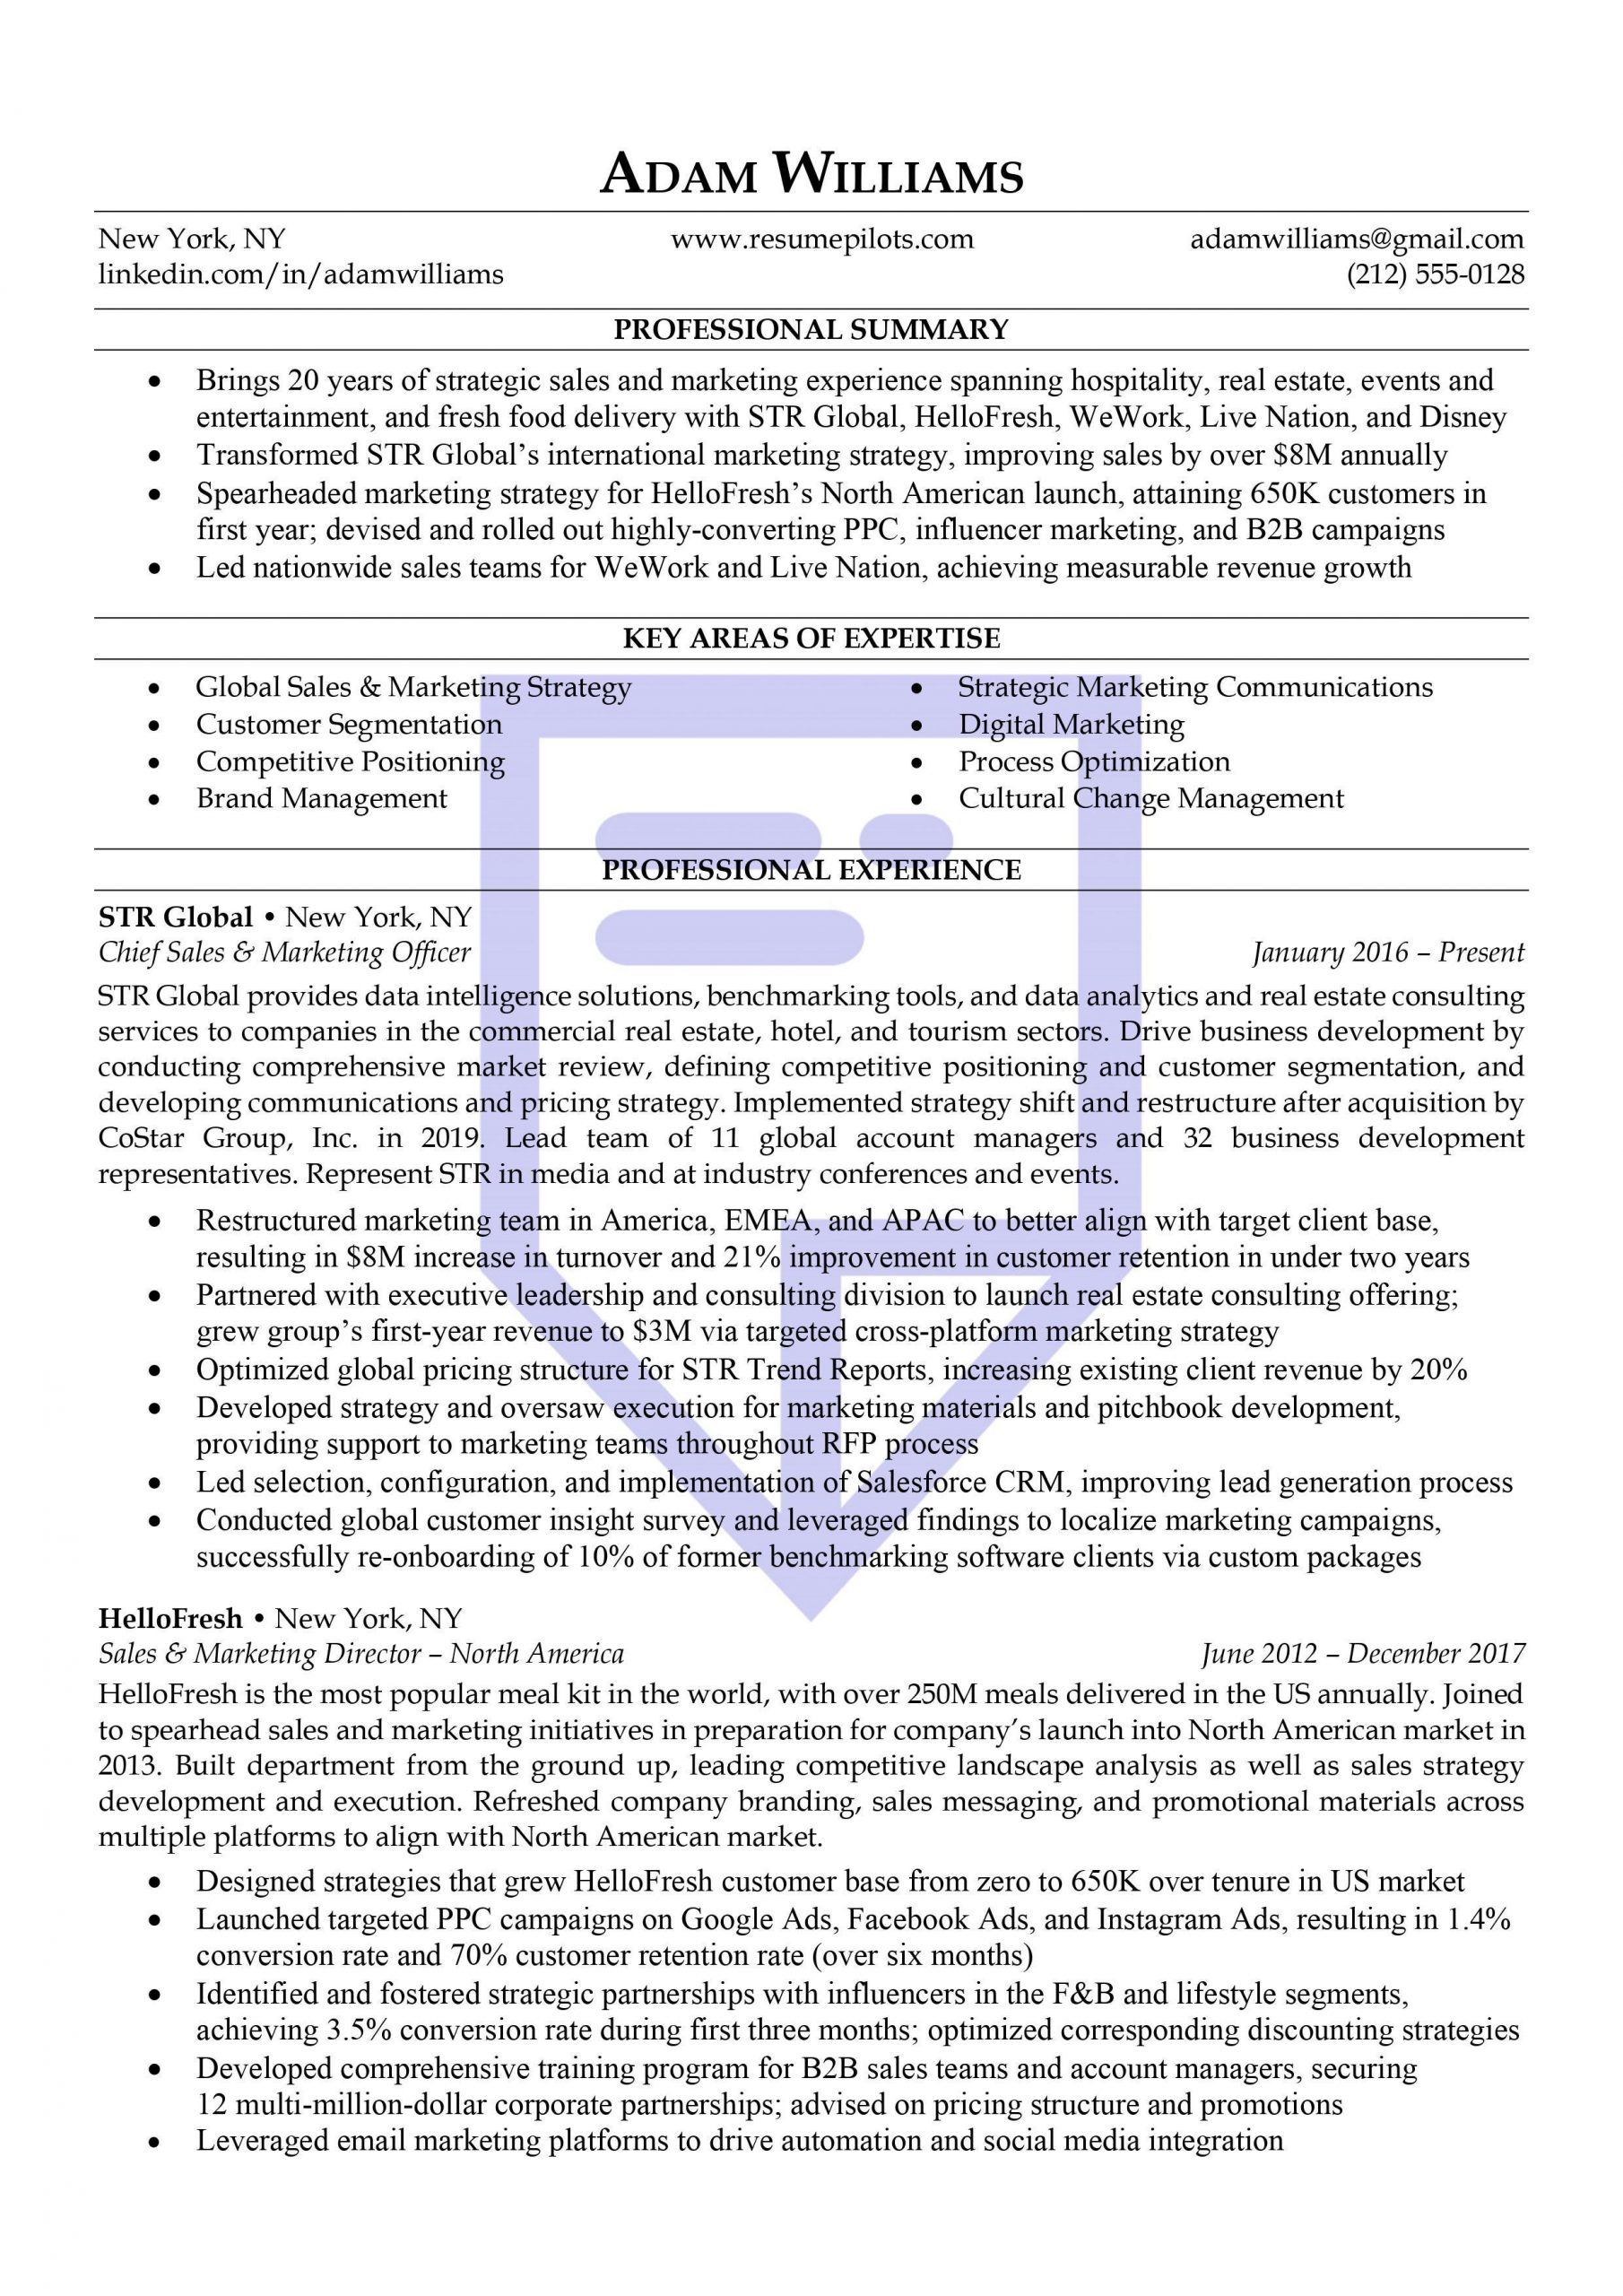 Sample Resume for Sales and Marketing Executive High-impact Marketing Executive Resume Sample (cmo) â Resume Pilots